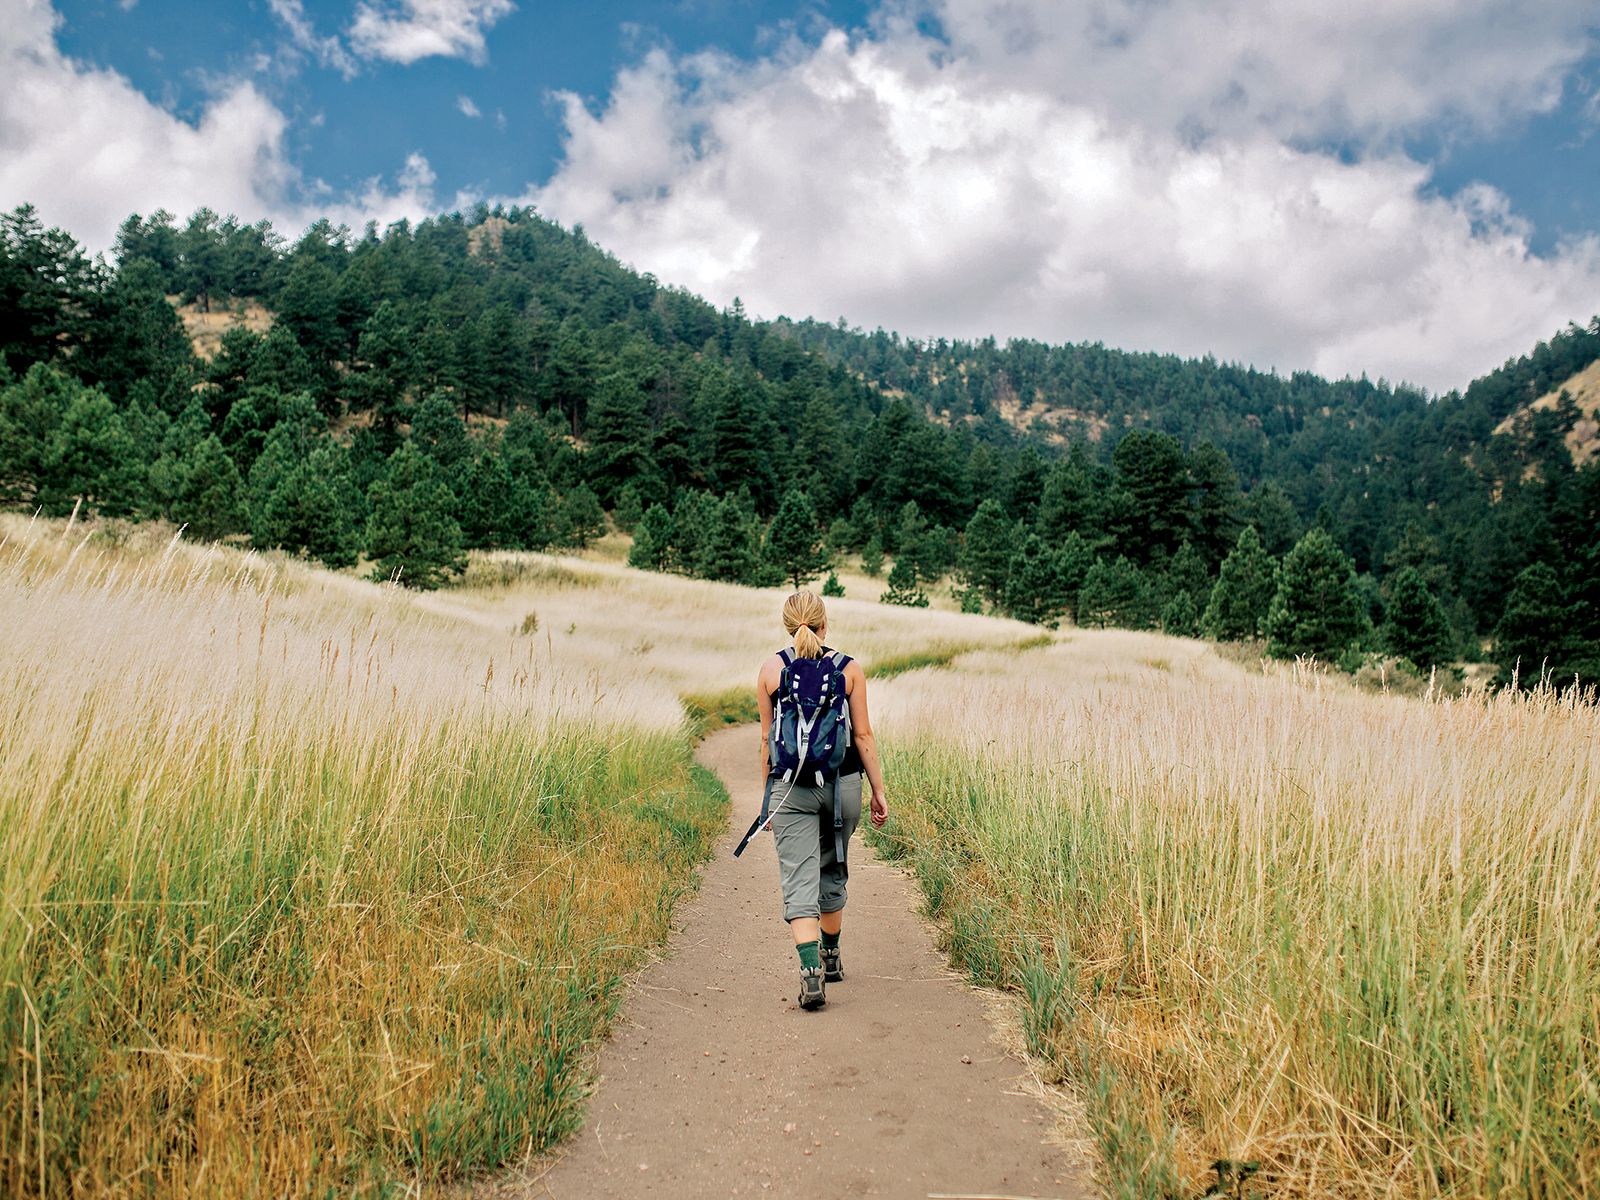 Your Guide to Outdoor Recreation During the Coronavirus Pandemic